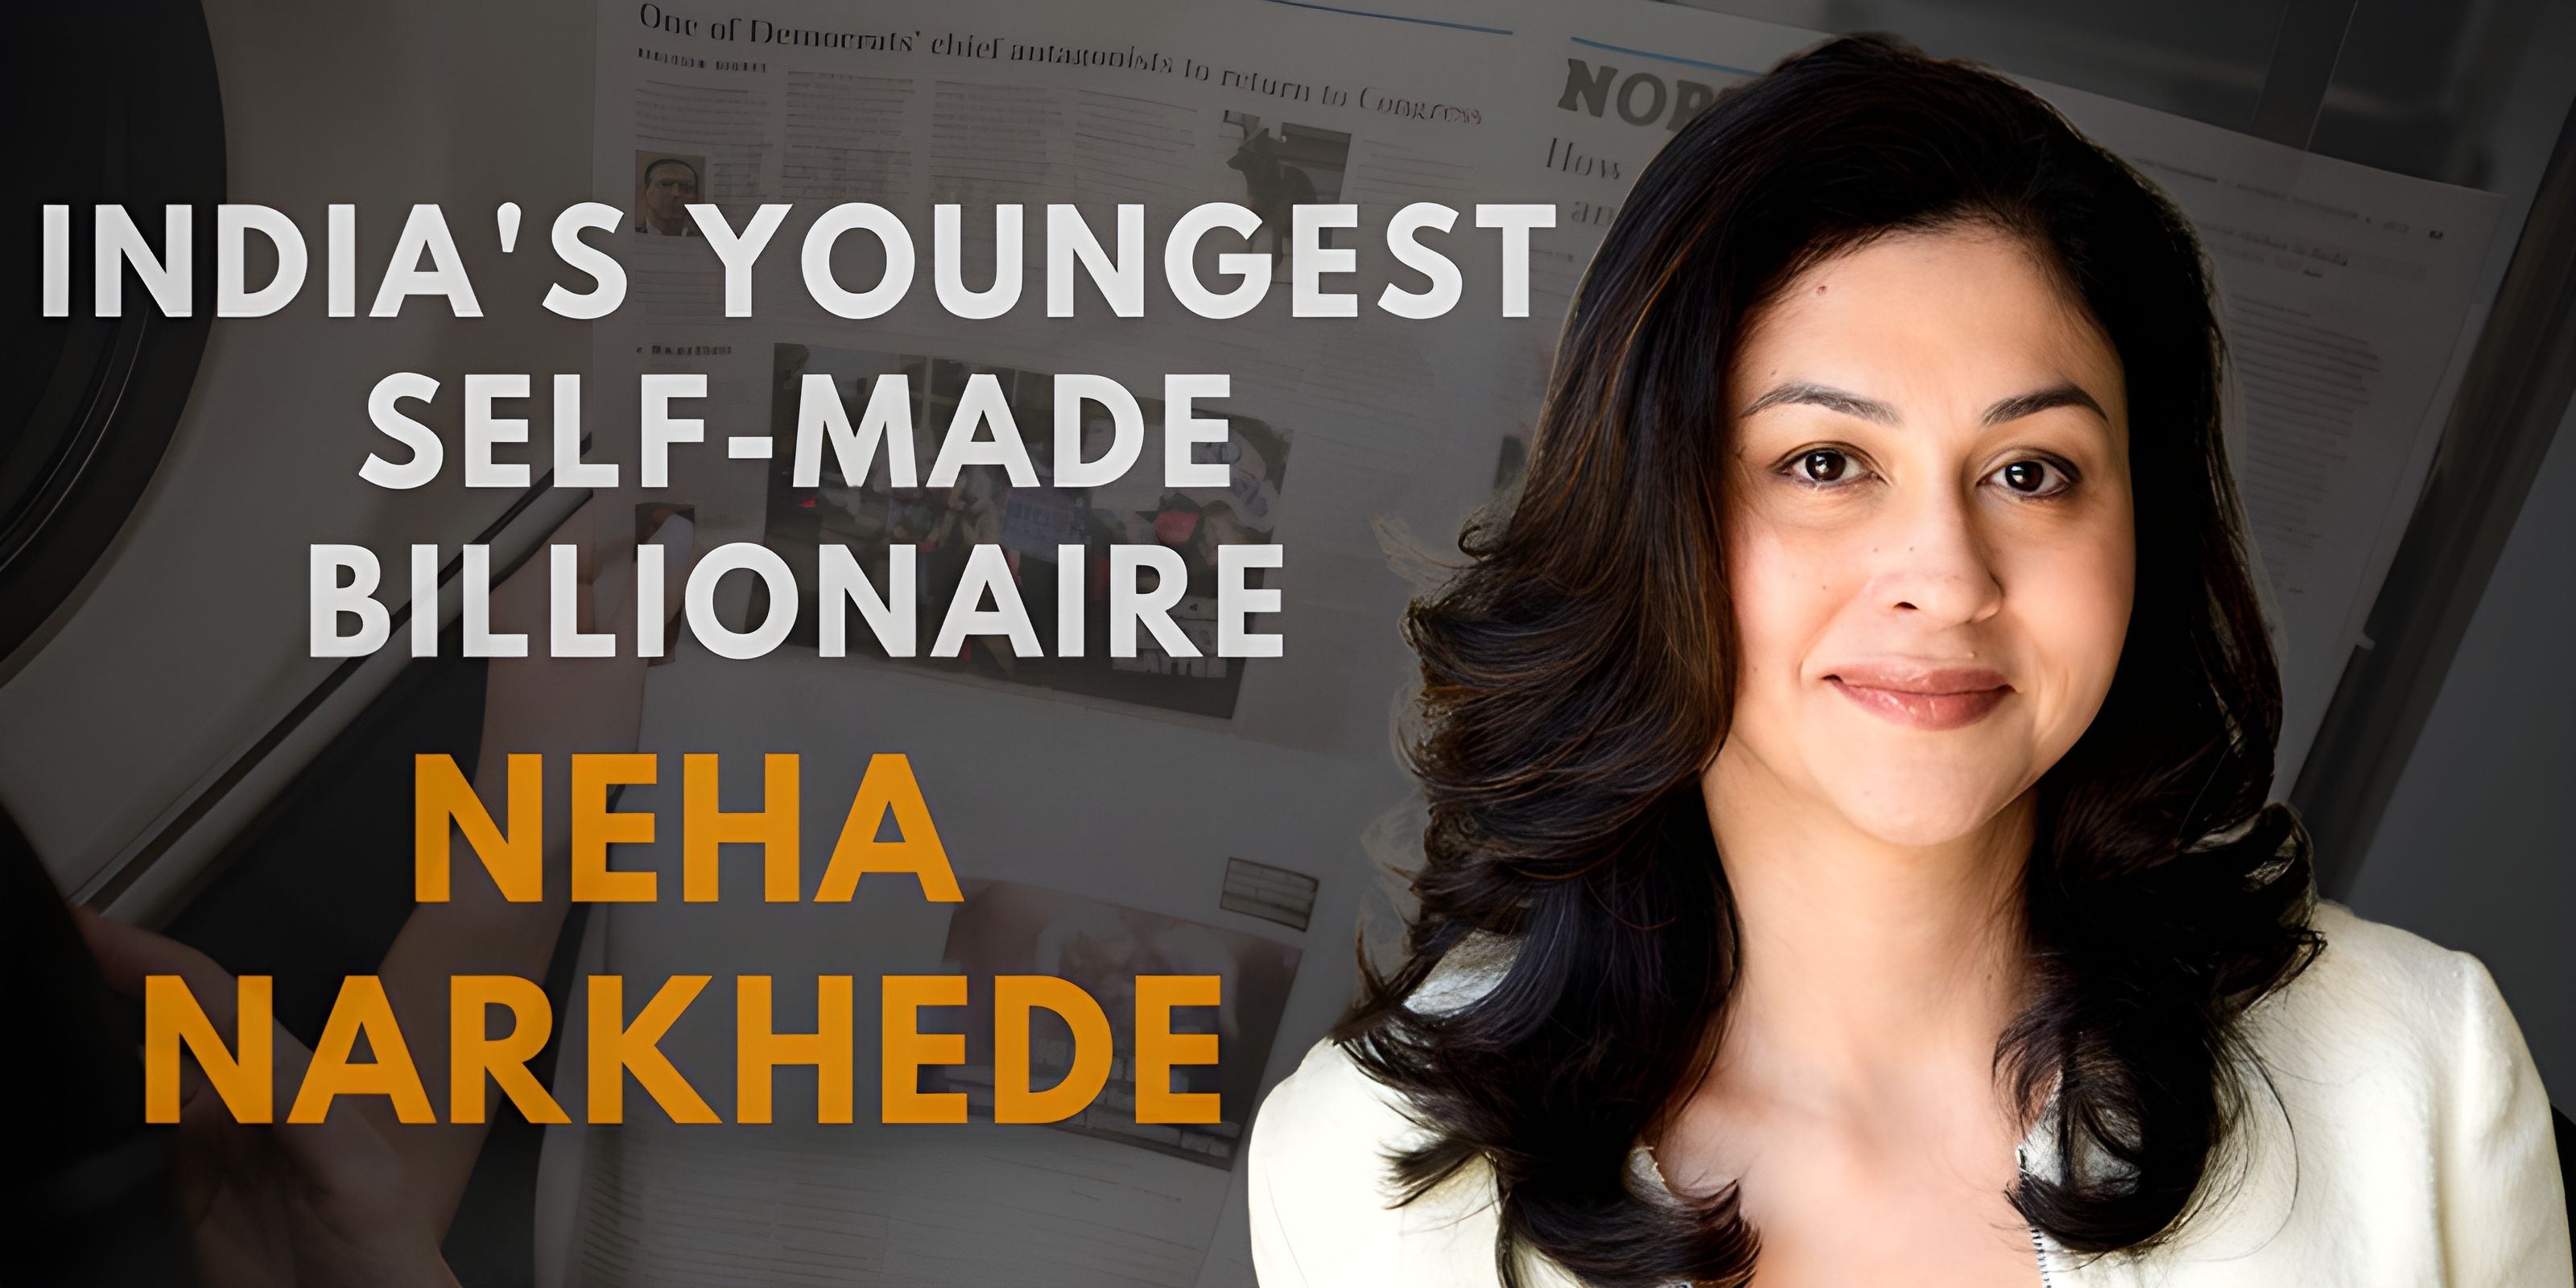 Neha Narkhede's Rise: India's Youngest Self-Made Billionaire